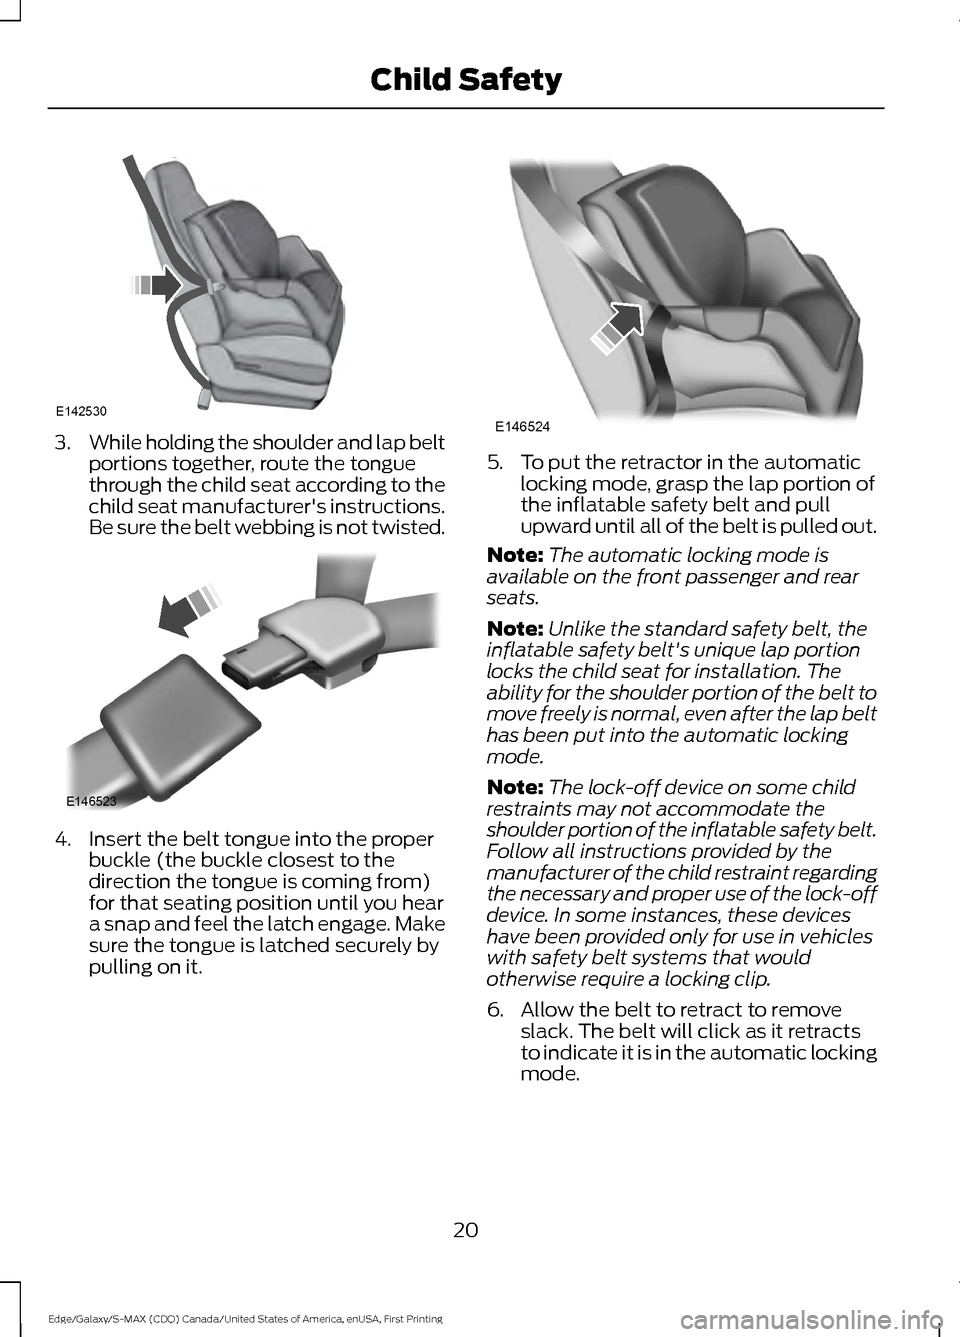 FORD EDGE 2016 2.G Owners Manual 3.
While holding the shoulder and lap belt
portions together, route the tongue
through the child seat according to the
child seat manufacturers instructions.
Be sure the belt webbing is not twisted. 